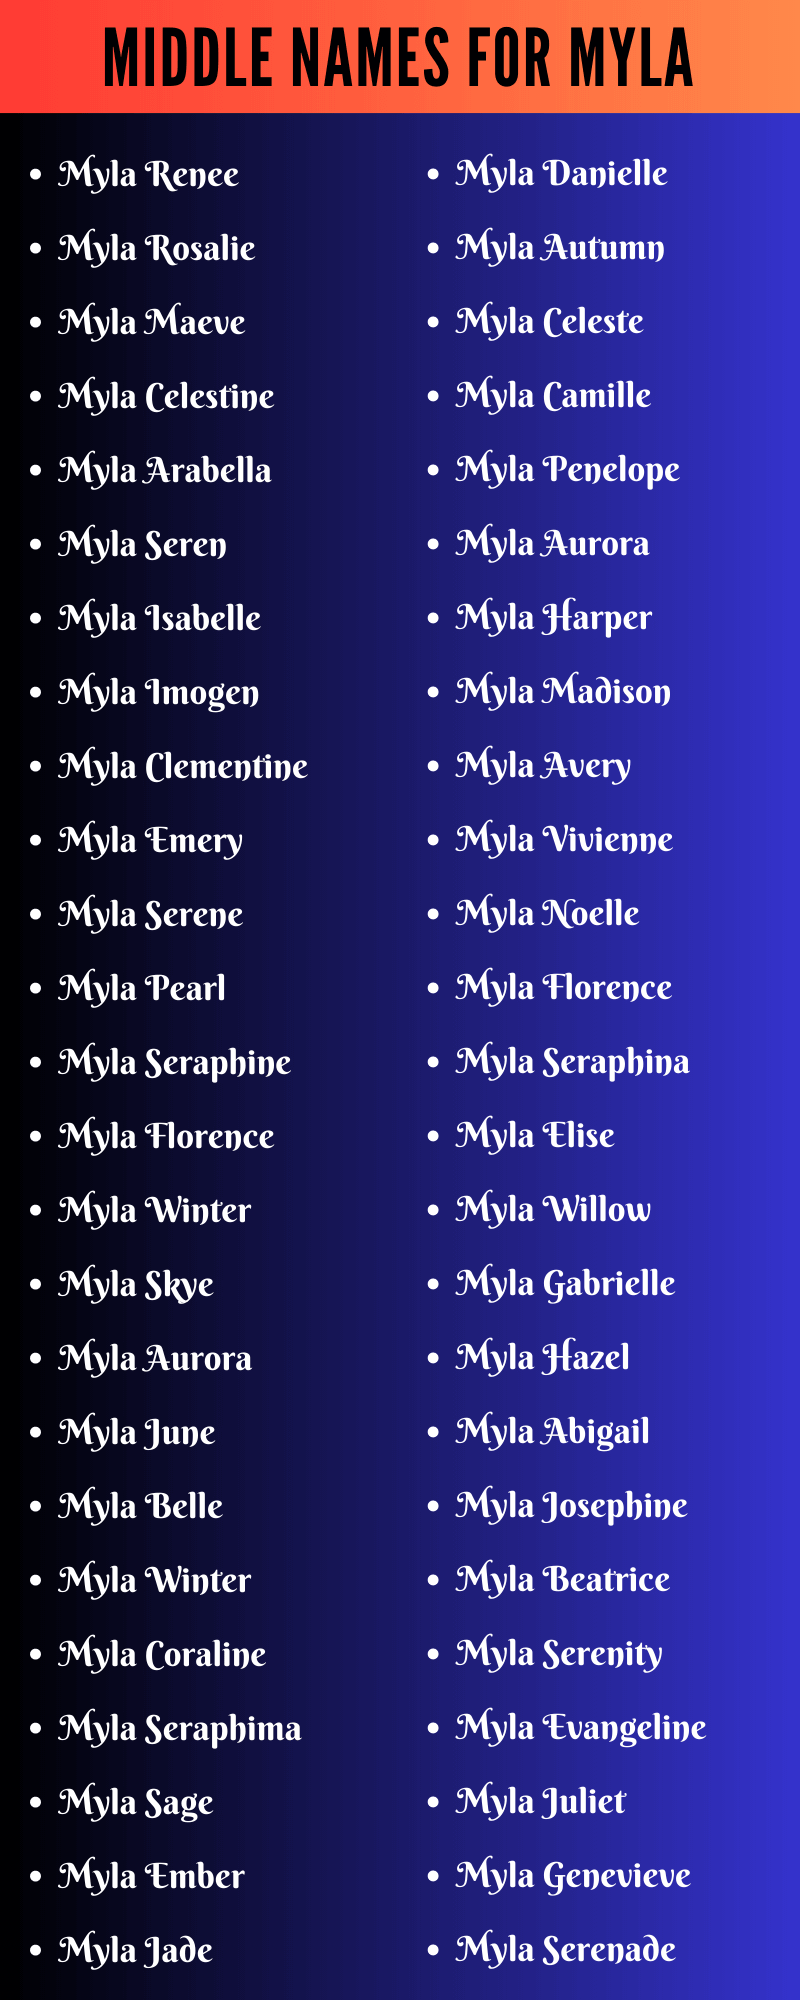 Middle Names For Myla